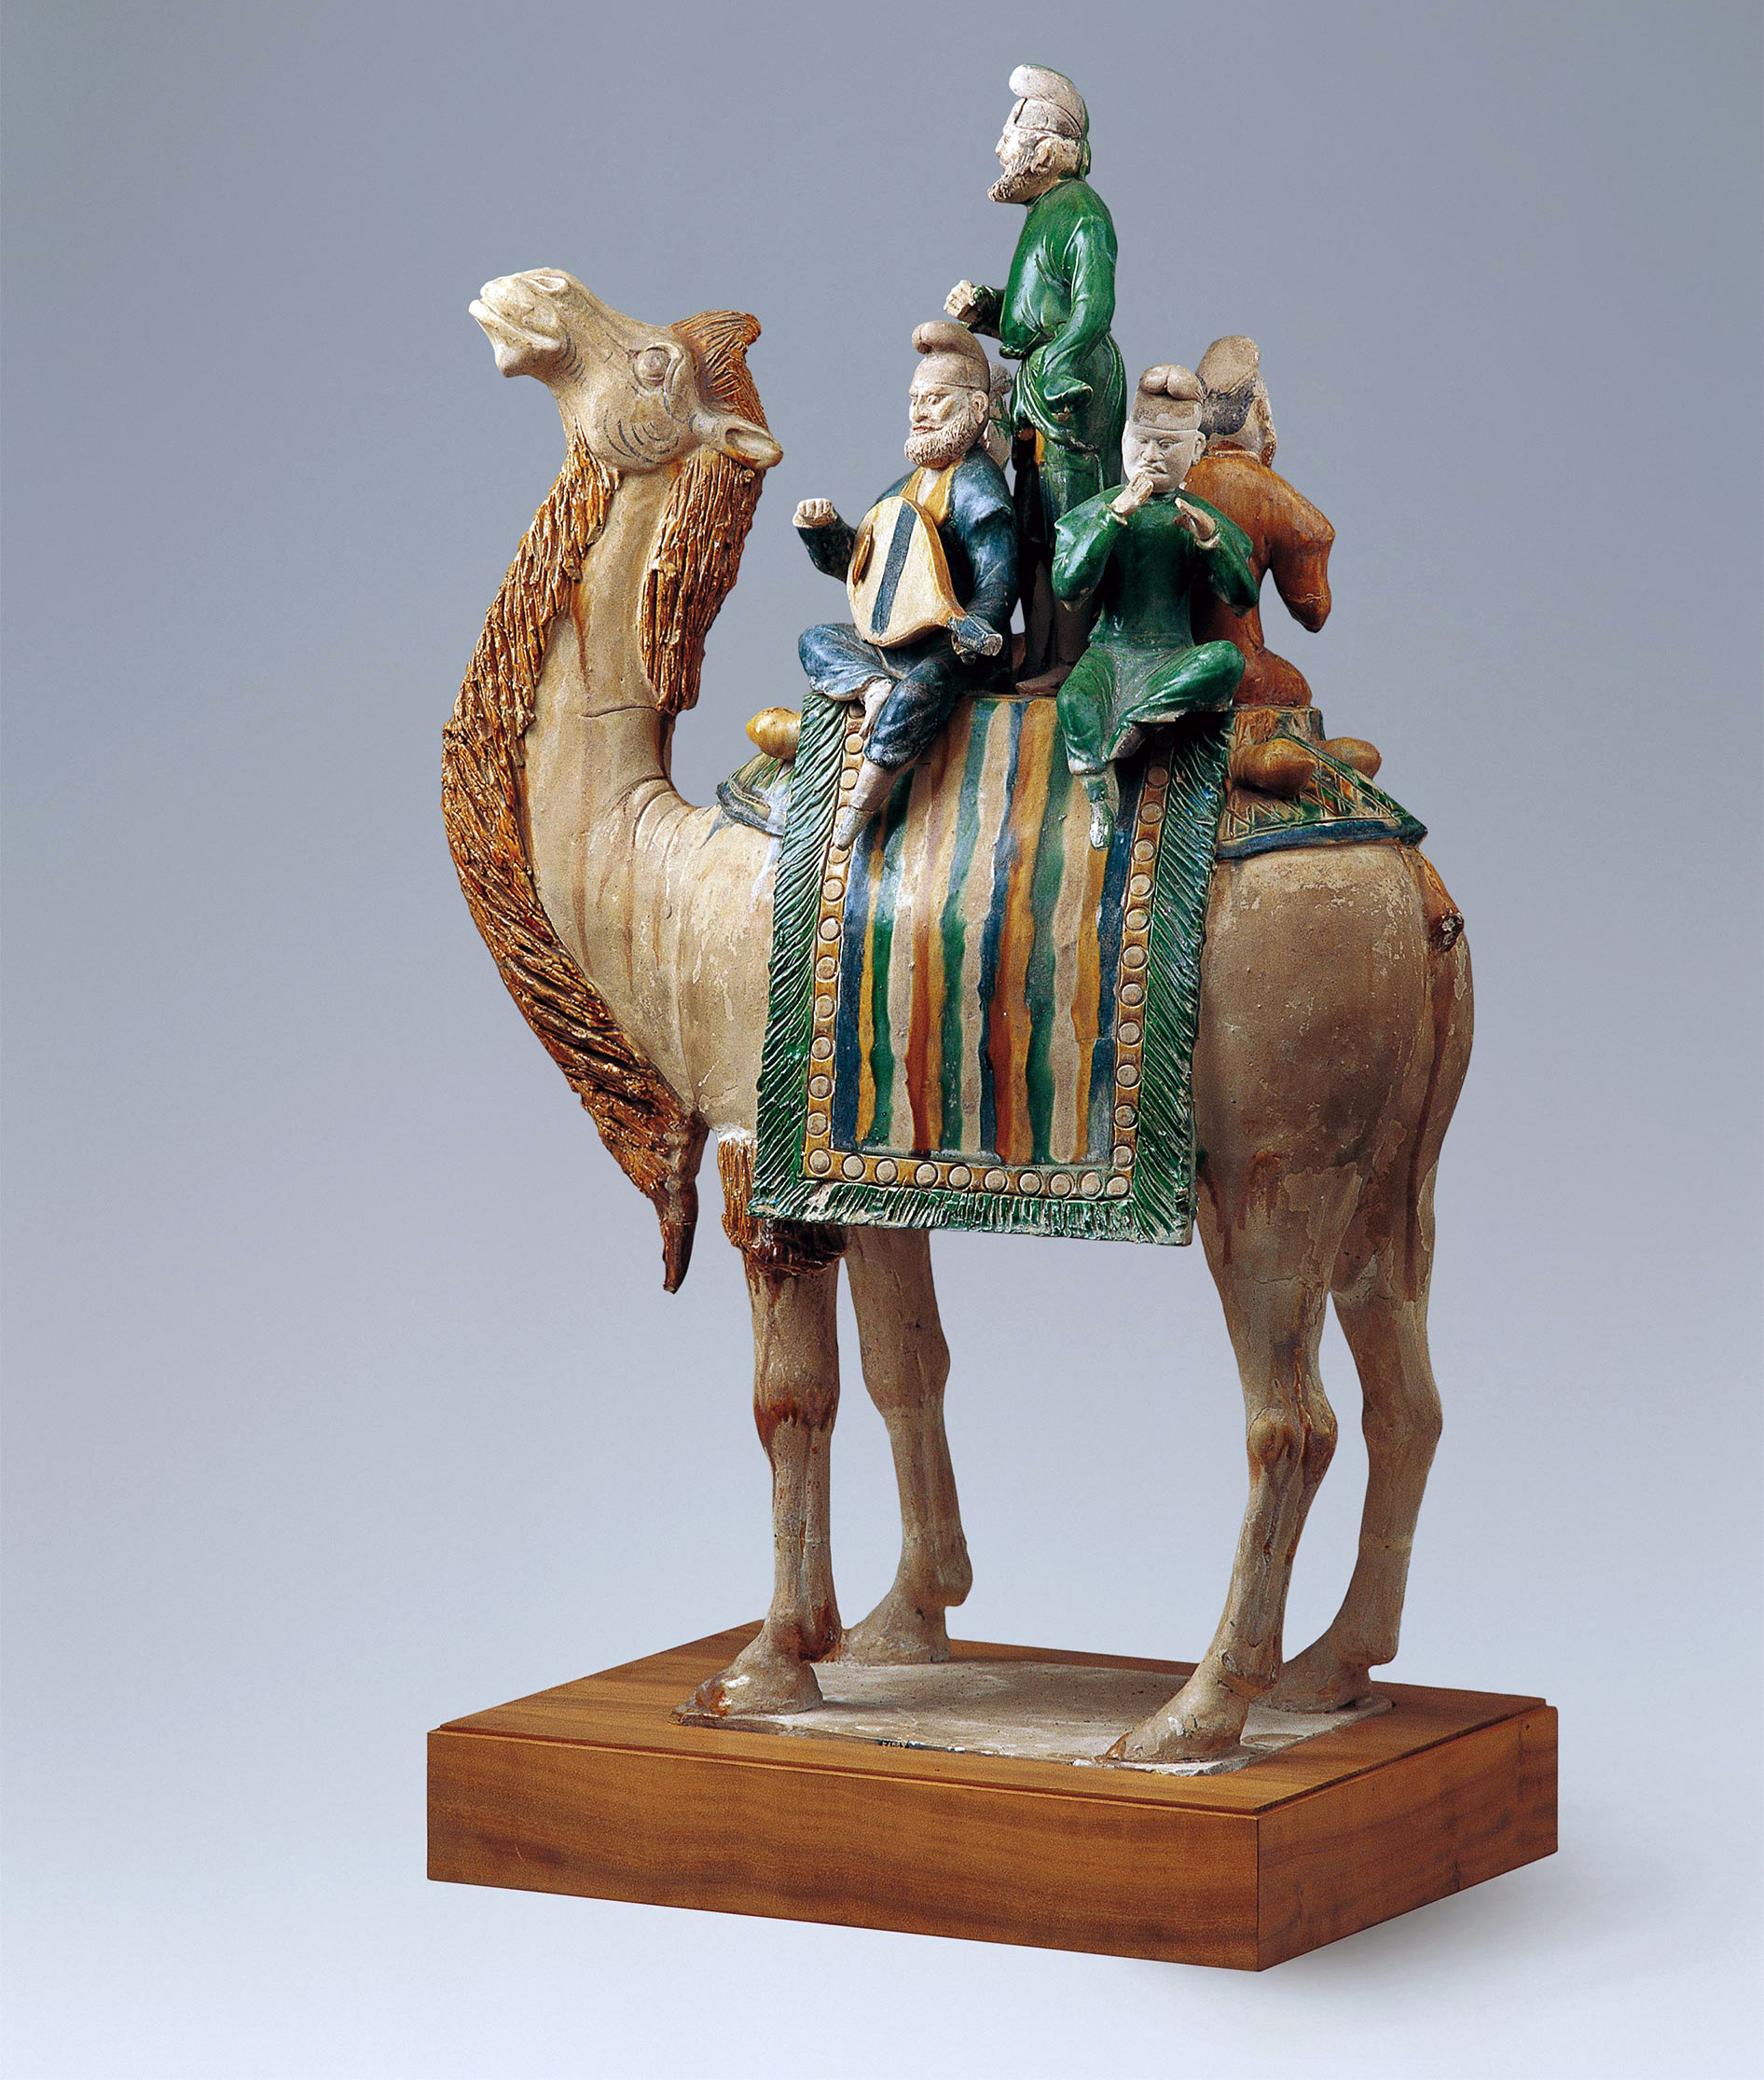 Musicians, likely Sogdians, are shown seated on a camel, Tang dynasty (618–907 C.E.), glazed earthenware, China, 58.4 cm high, excavated in 1957 from the tomb of Xianyu Tinghui, general of Yunhui, buried in western suburbs of Chang’an (Xi’an), dated to 723 C.E. (National Museum of China, Beijing)